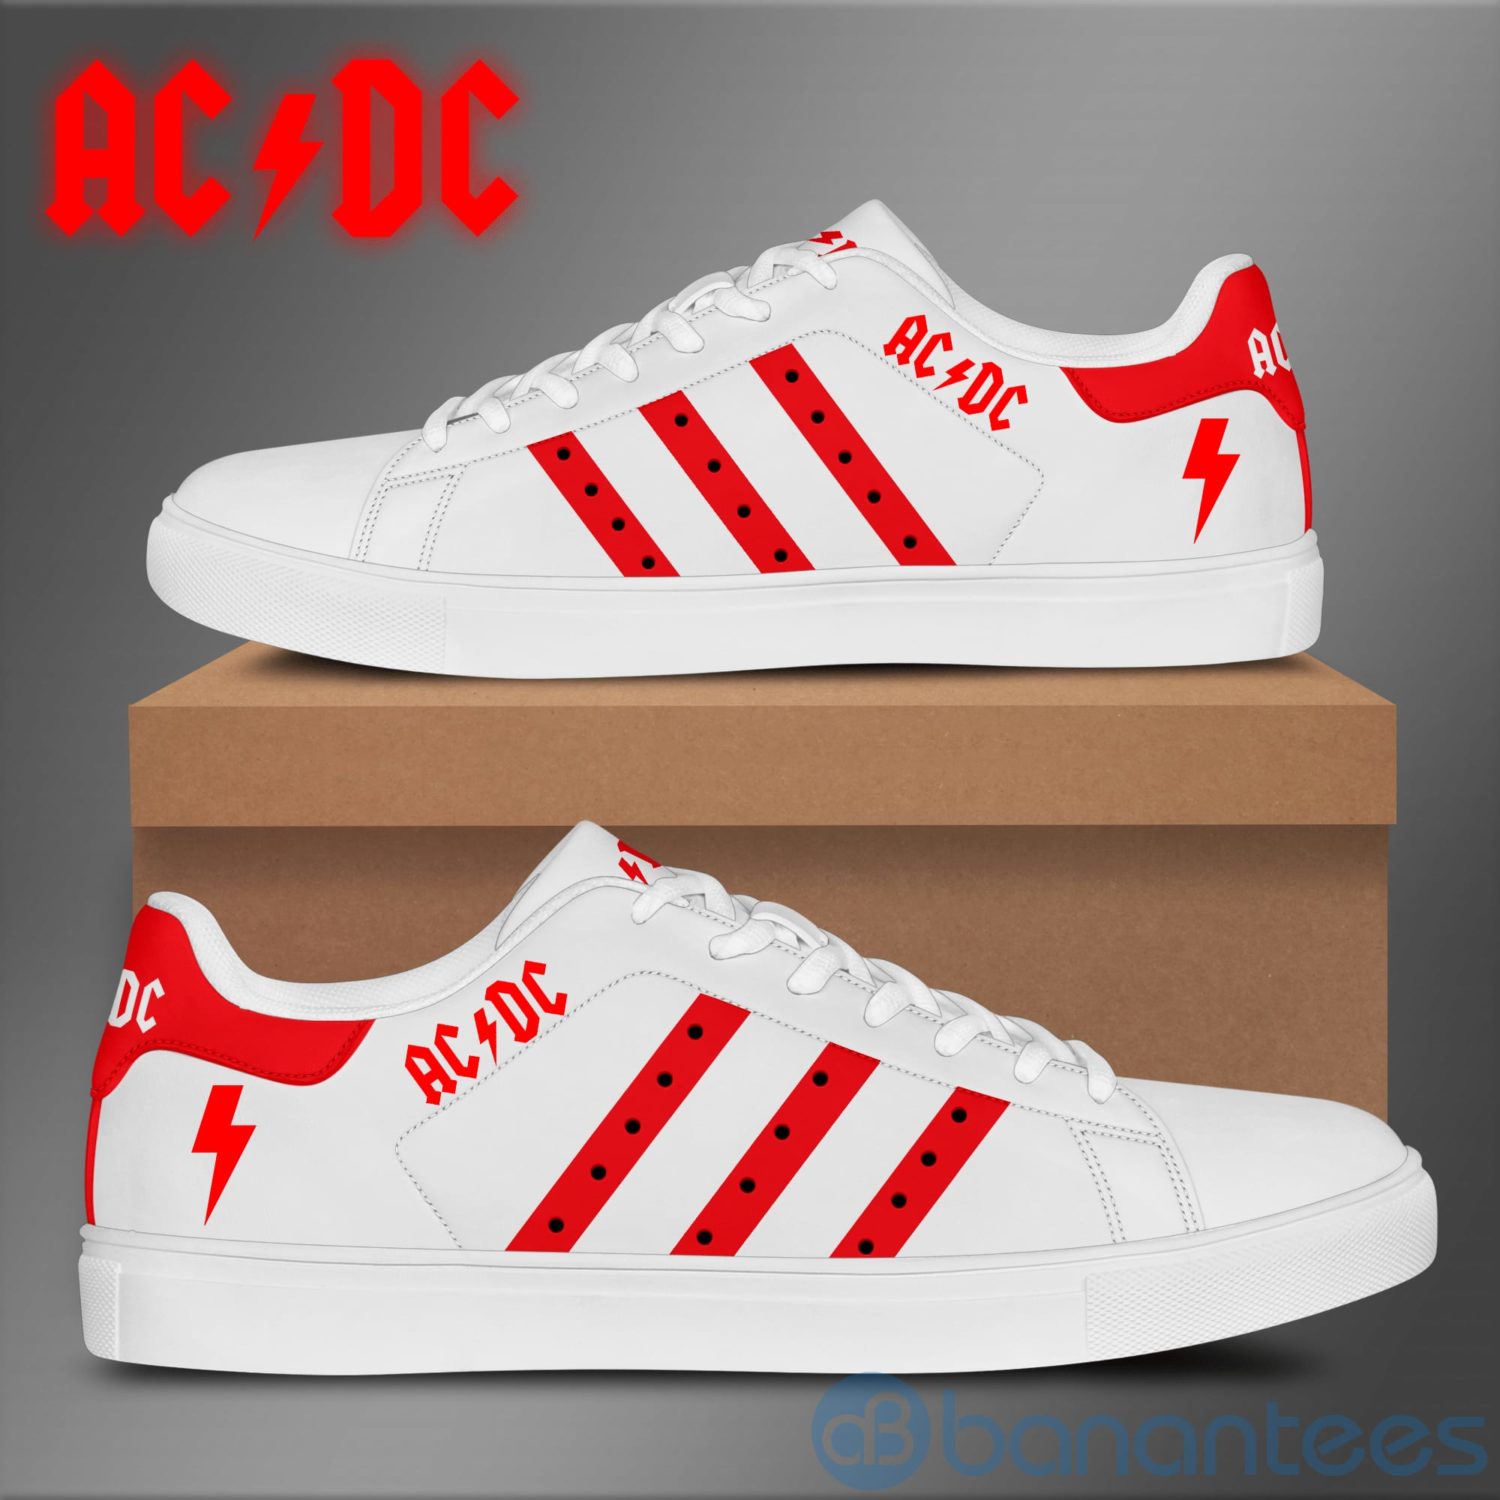 Acdc Red striped White Low Top Skate Shoes